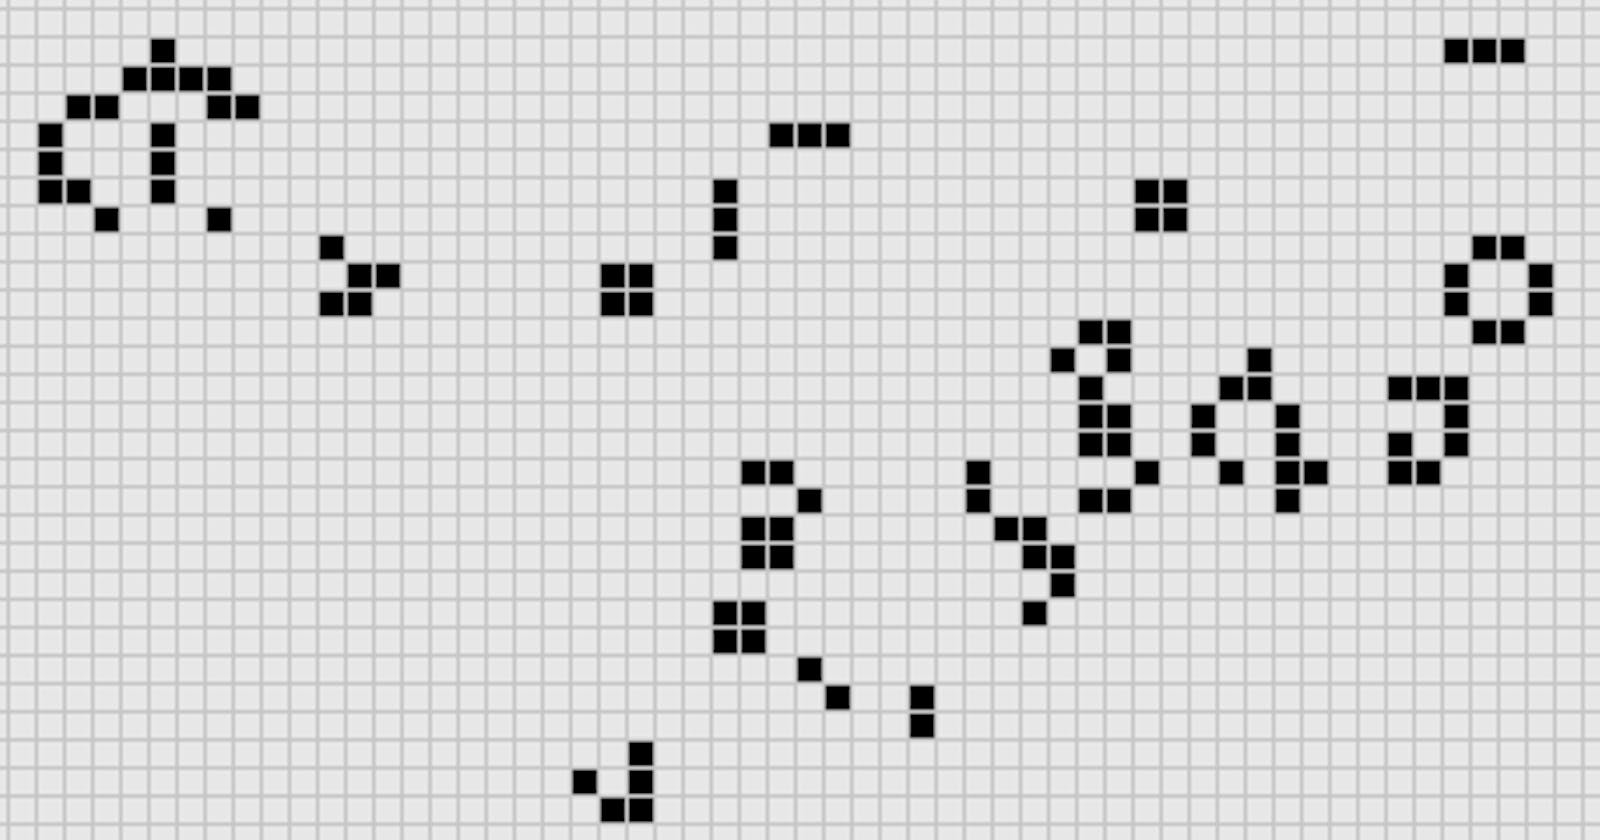 Conway's Game of Life on Ethereum based on Randomness provided by a Chainlink Oracle